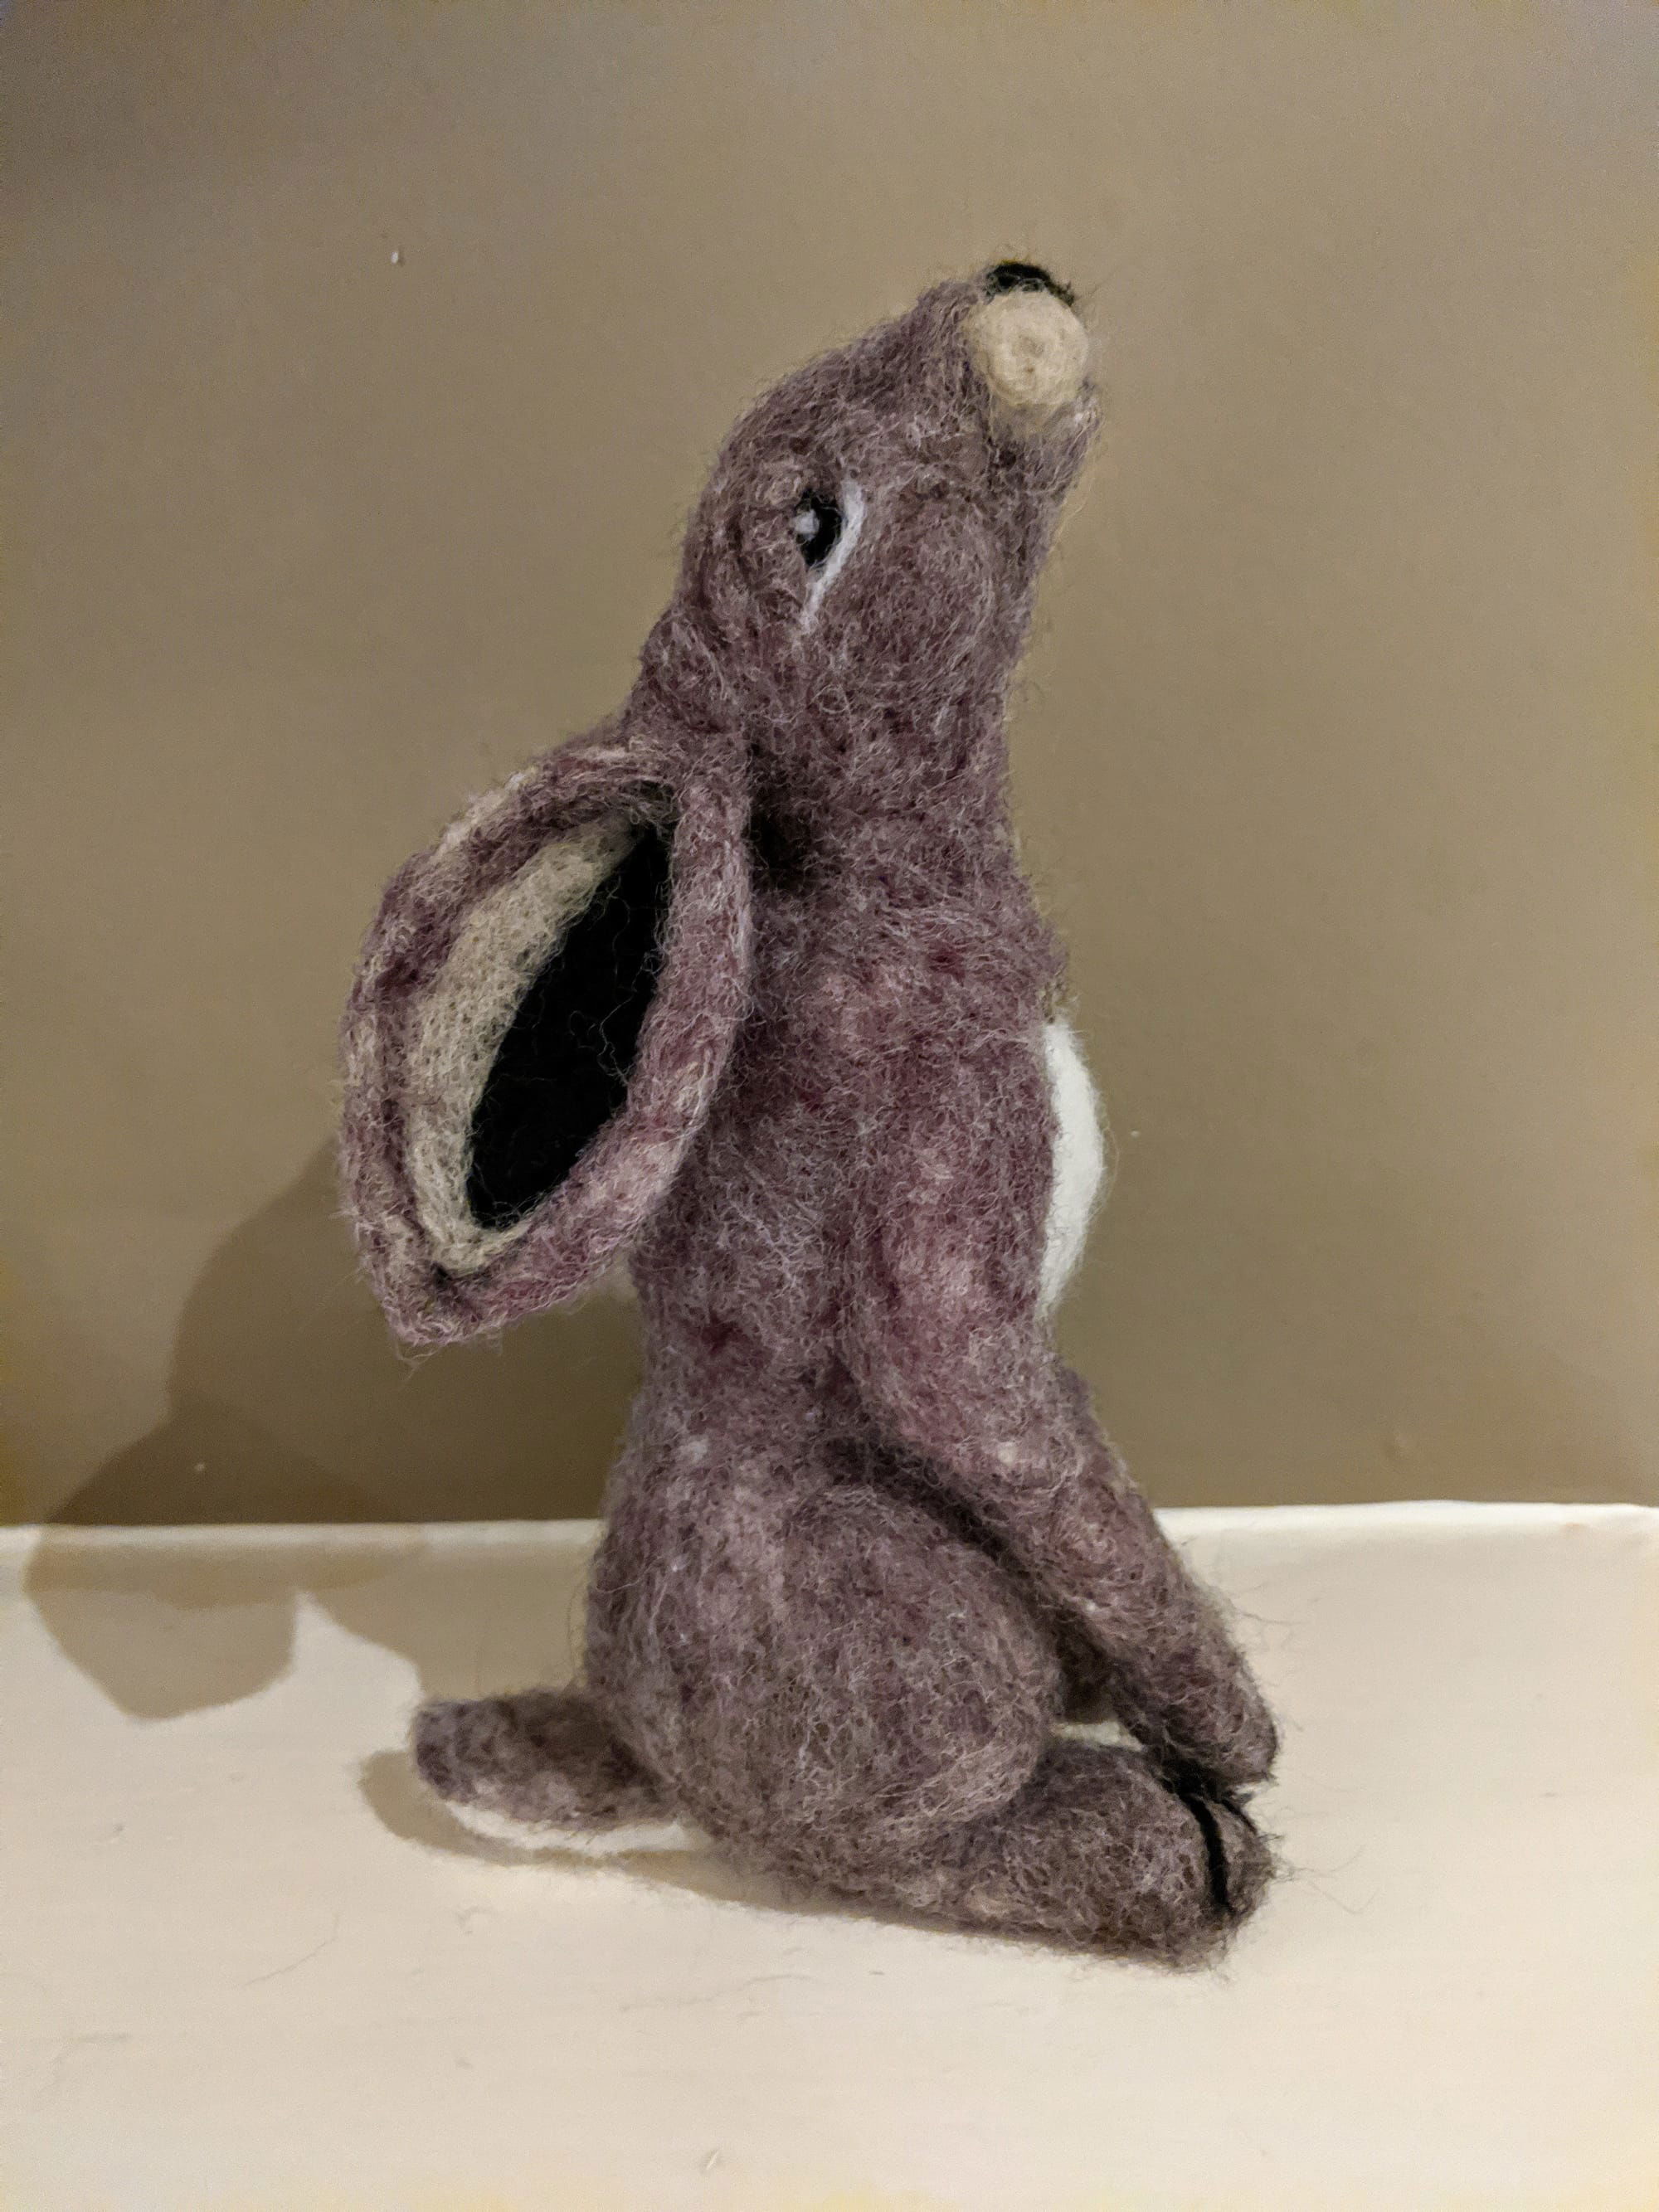 Needlefelted Moongazing Hare, by Jo